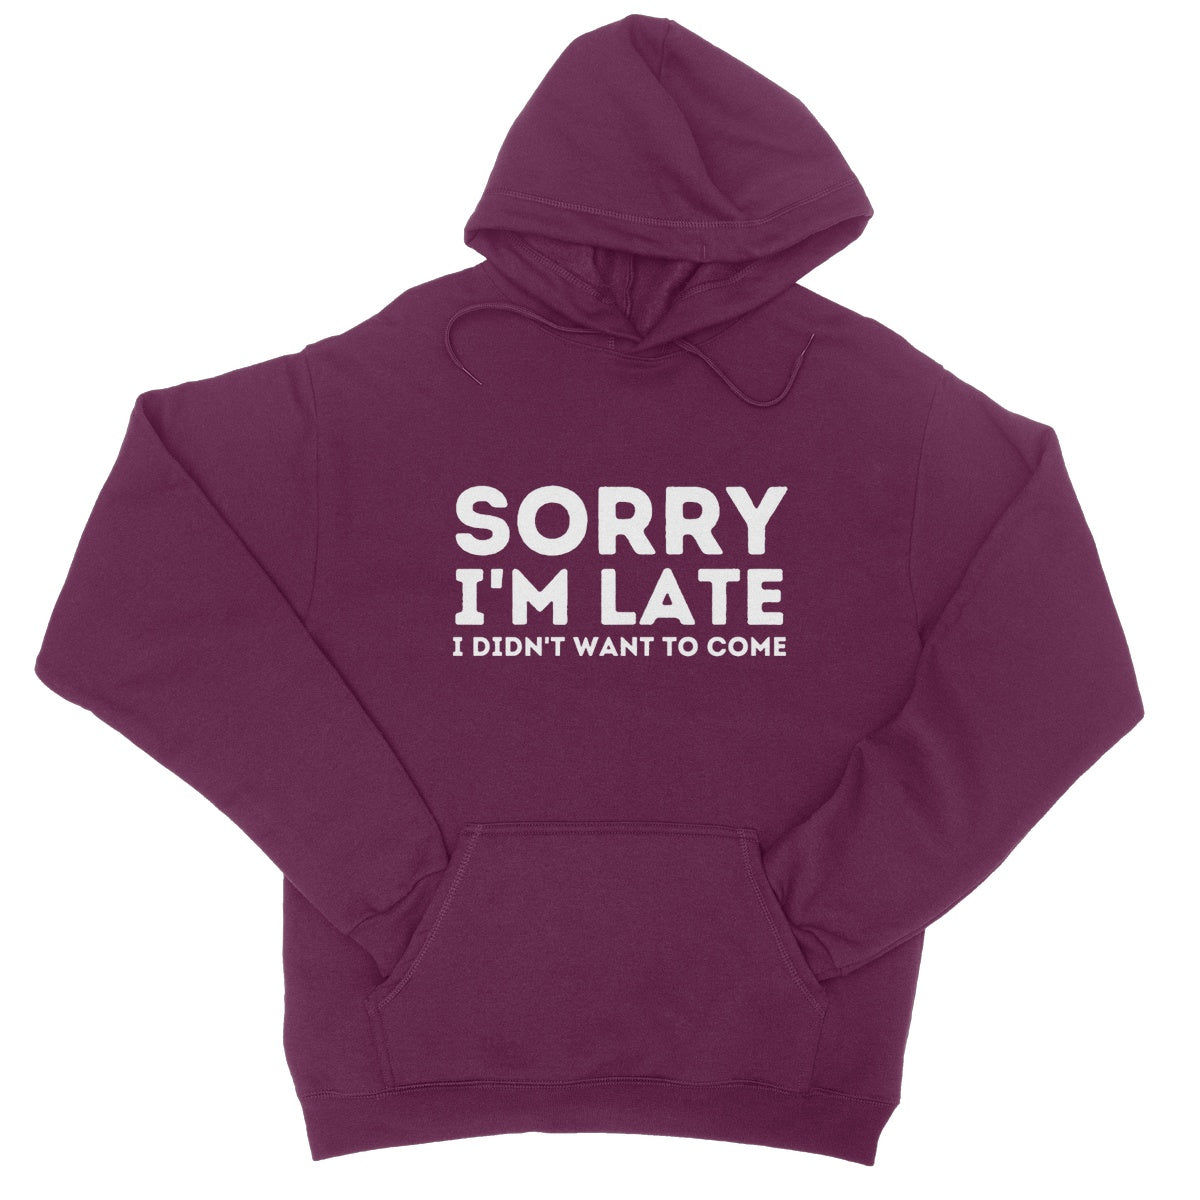 sorry I'm late I didn't want to come hoodie purple